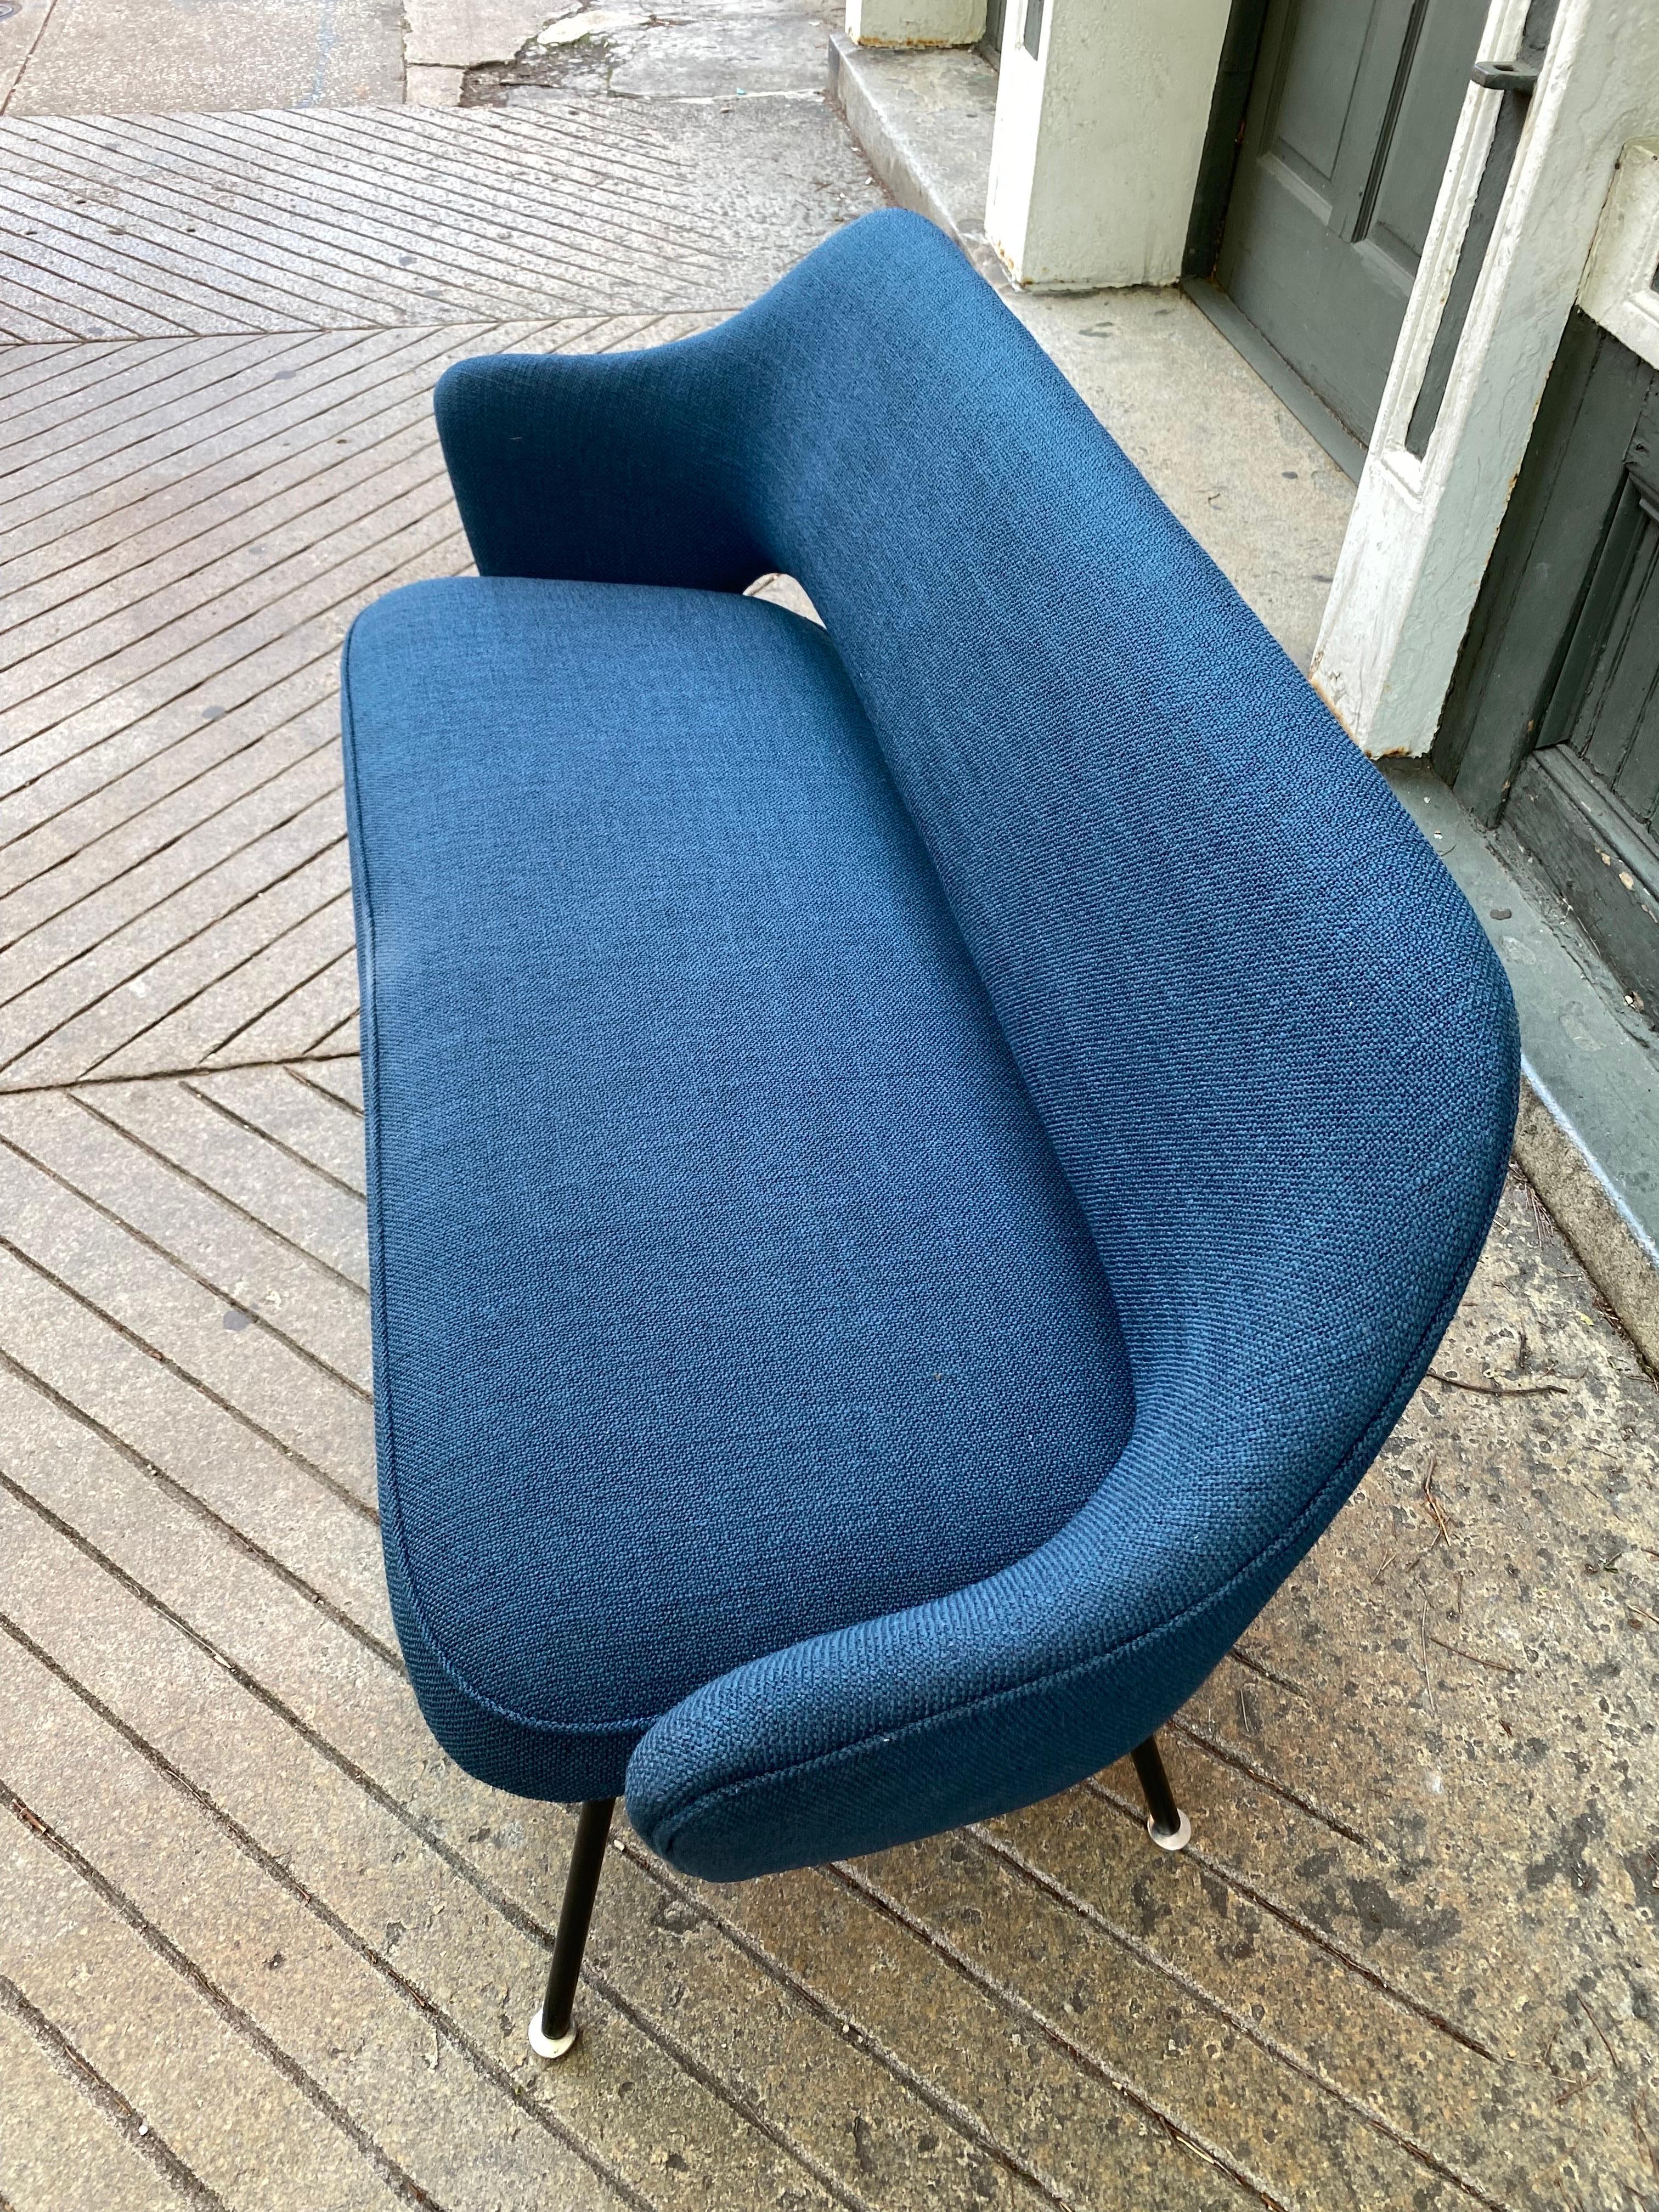 Built to Order Saarinen for Knoll Style Loveseat In New Condition For Sale In Philadelphia, PA